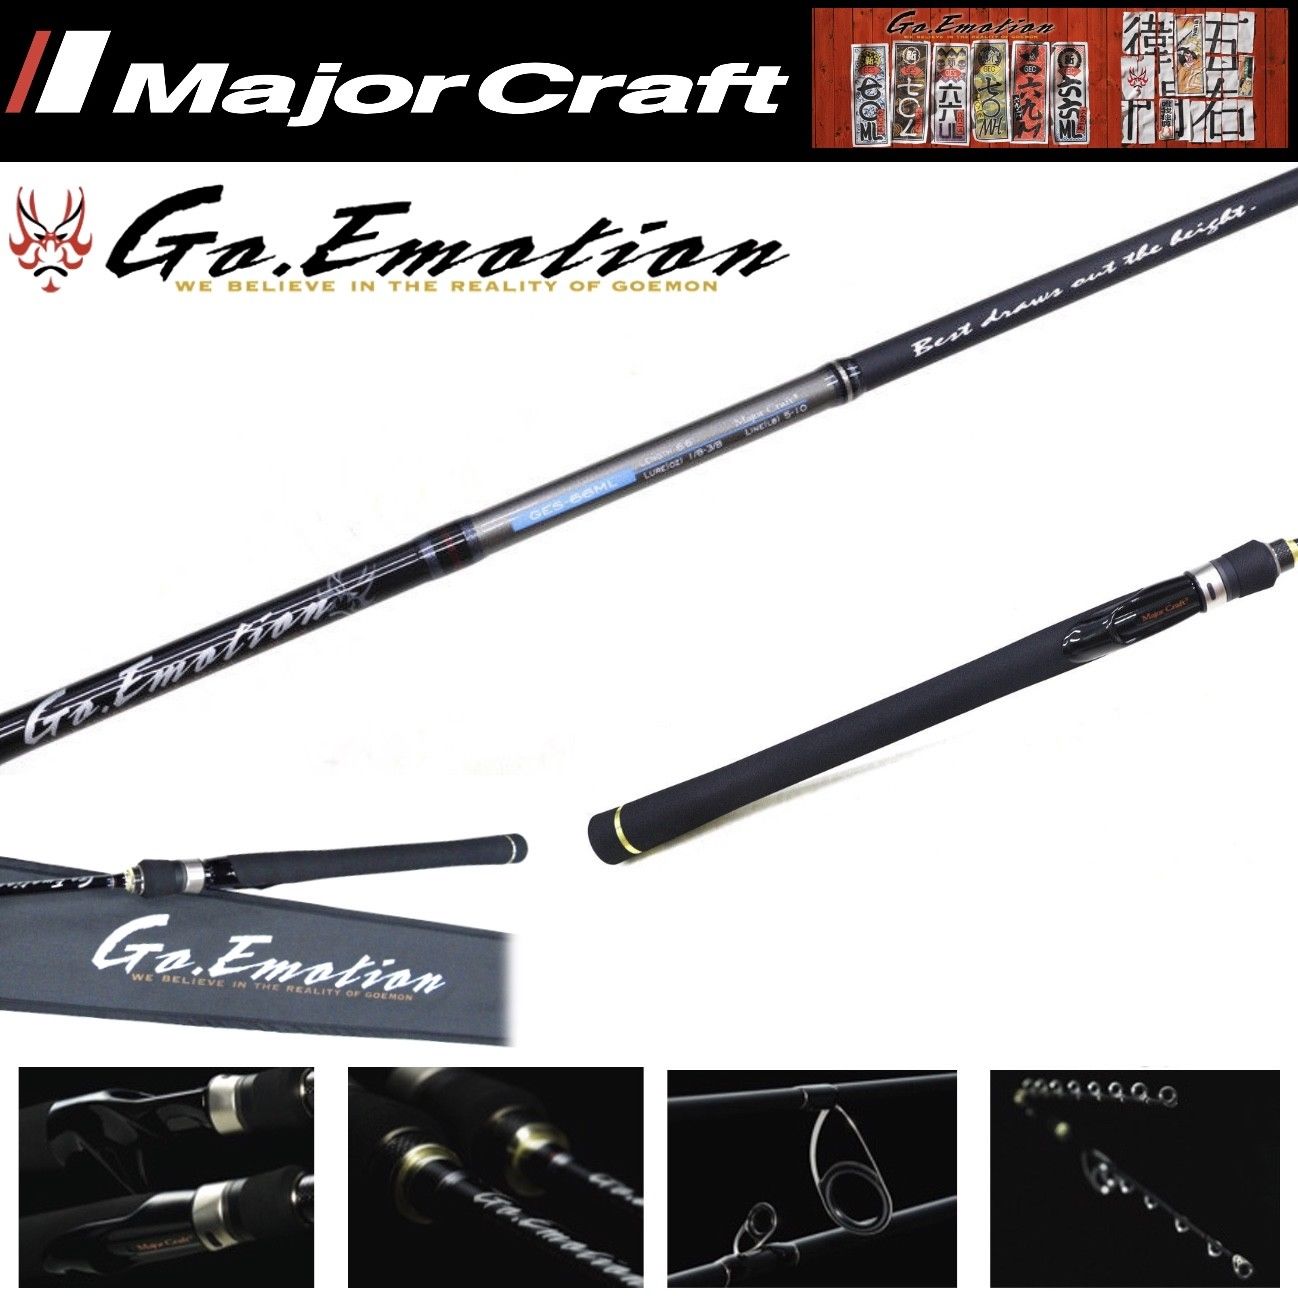 MAJOR CRAFT ONE PIECE BASS SPINNING RODS GO EMOTION SERIE